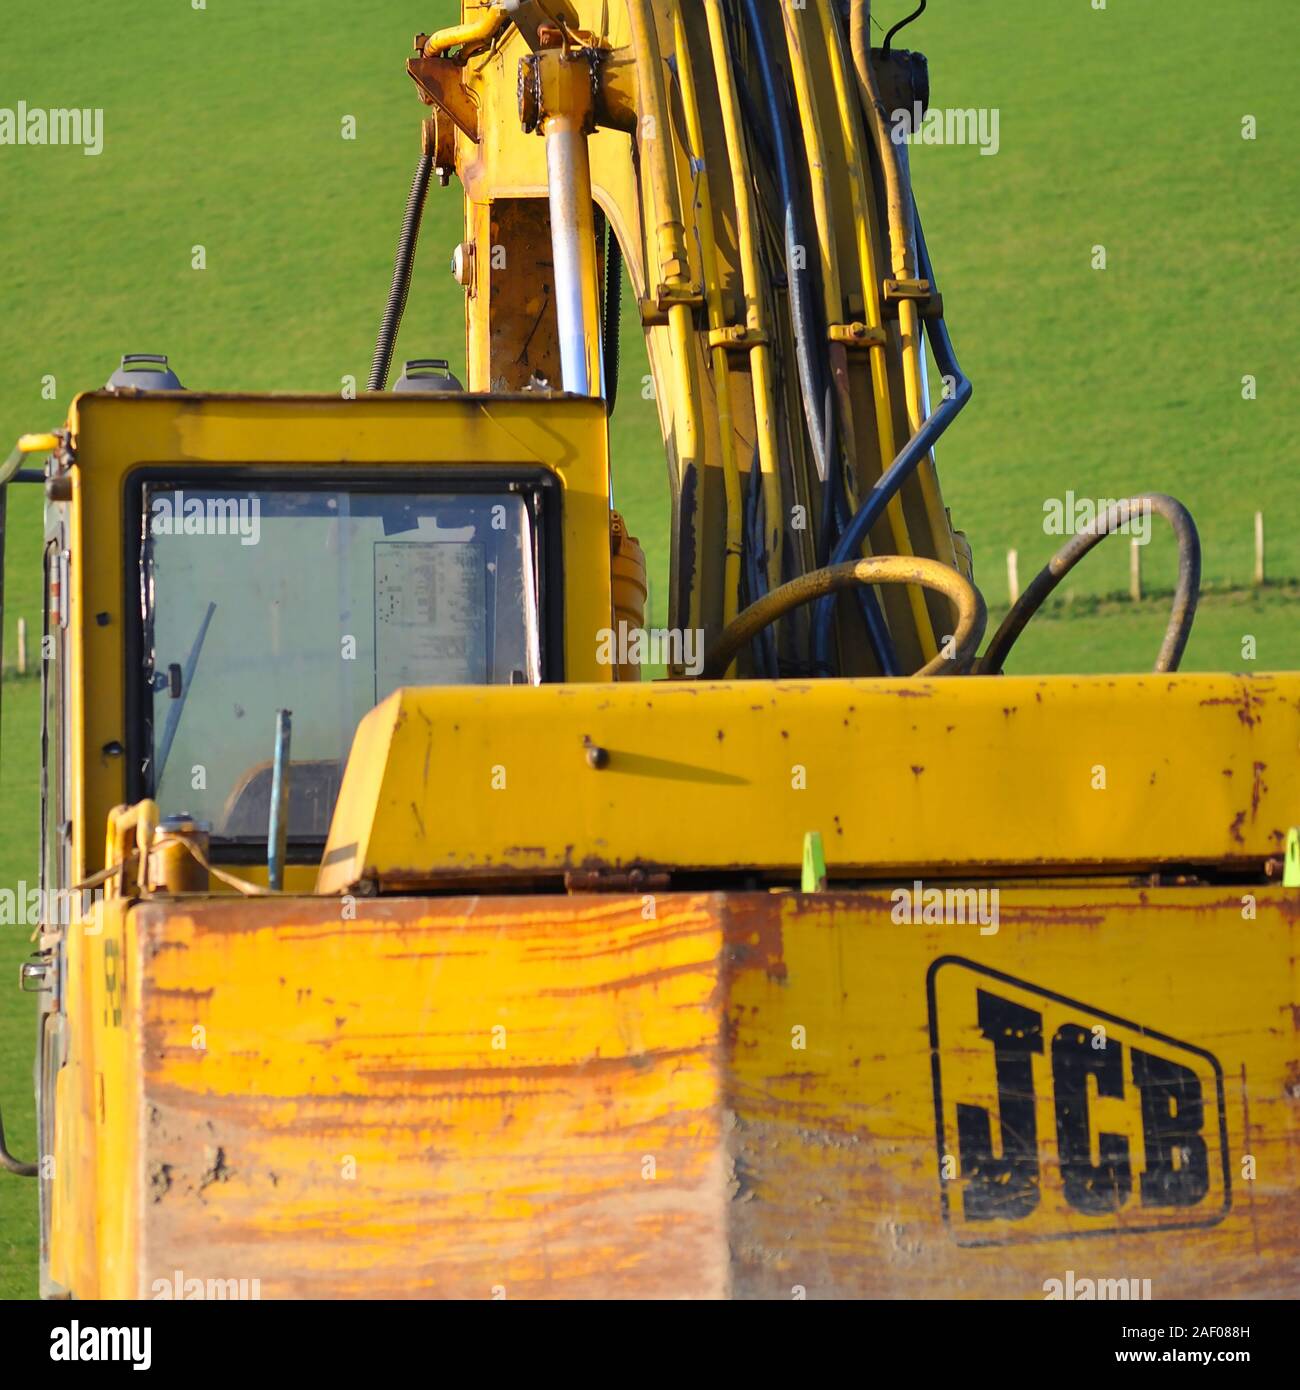 Aberystwyth Ceredigion Wales/UK March 03 2012: Rear view of a a JCB digger in a field Stock Photo